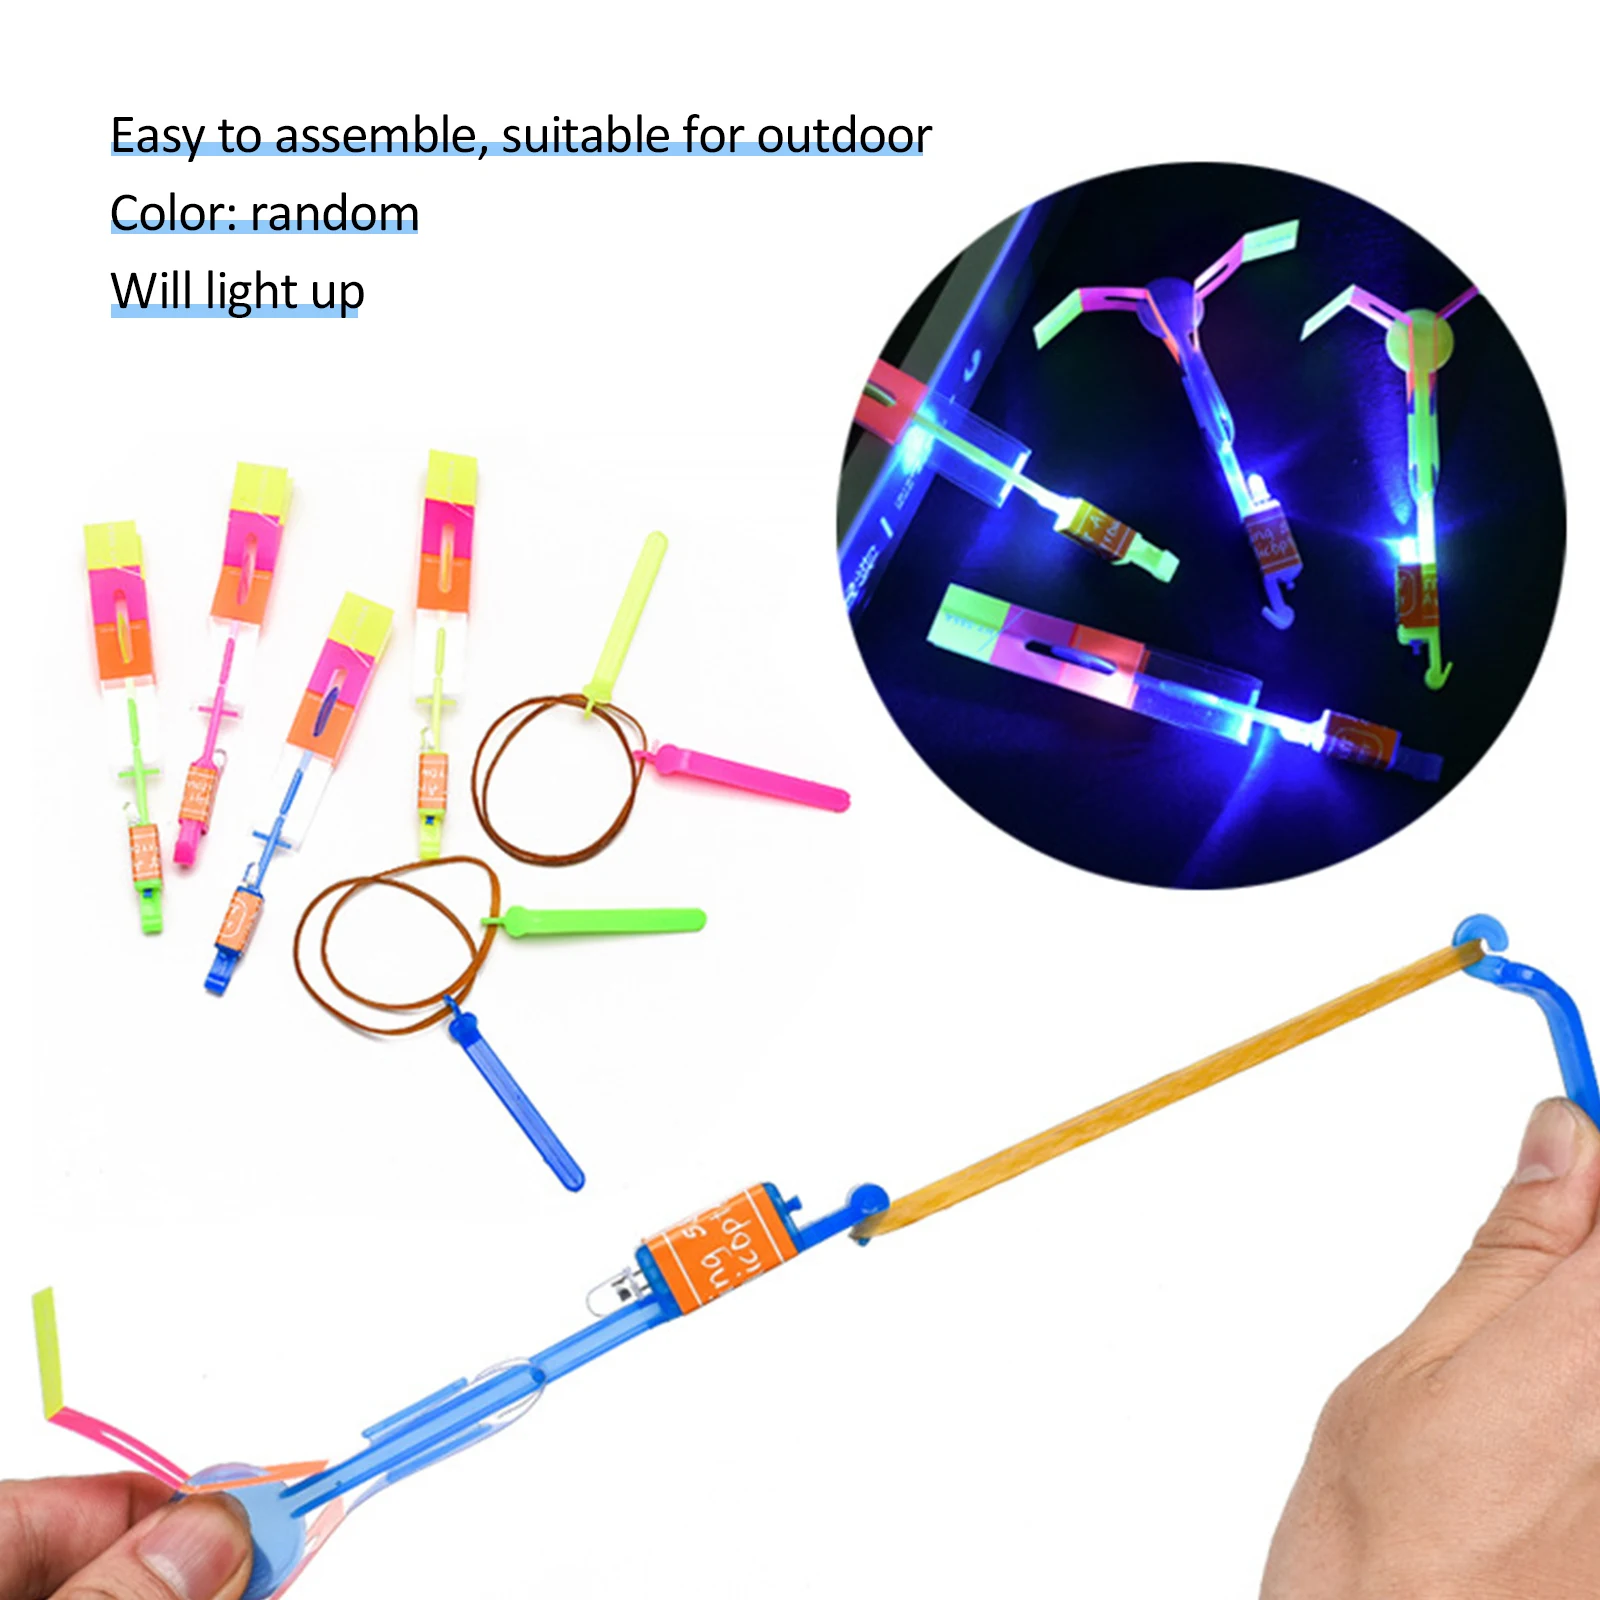 LED Light Arrow Flying Toy Elastic Slingshot Flying Copters Outdoor Night Game for Kid Bamboo Dragonfly Toy Kid Gift